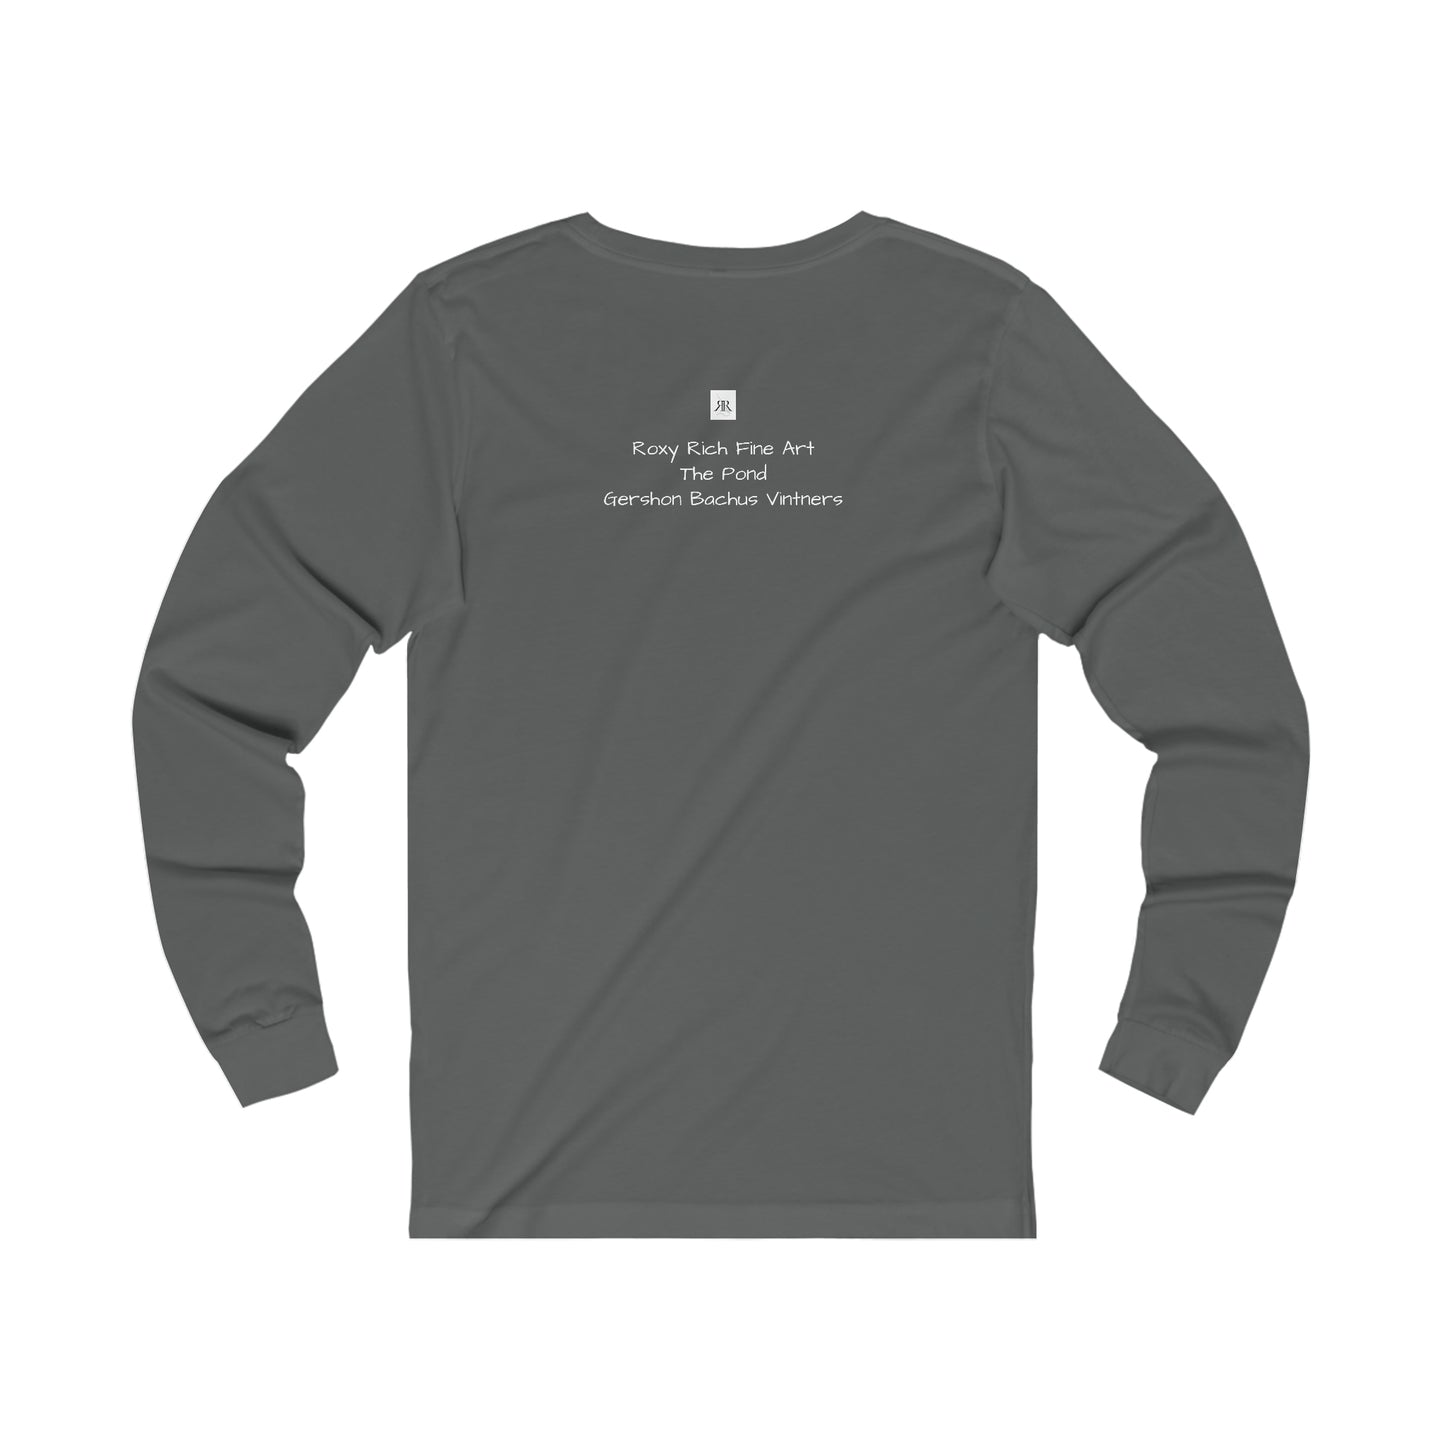 The Pond at GBV Unisex Jersey Long Sleeve Tee